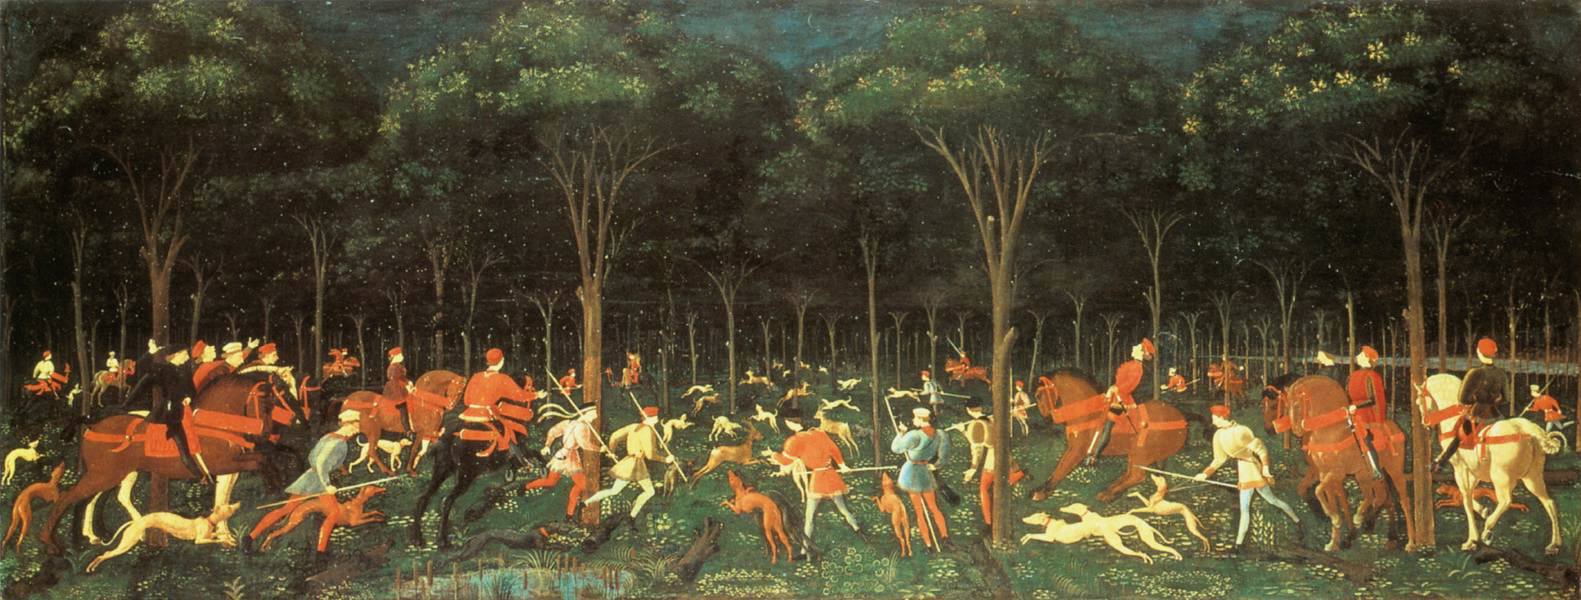 The Hunt in the Forest by Paolo Uccello - c. 1470 - 65 cm × 165 cm Ashmolean Museum